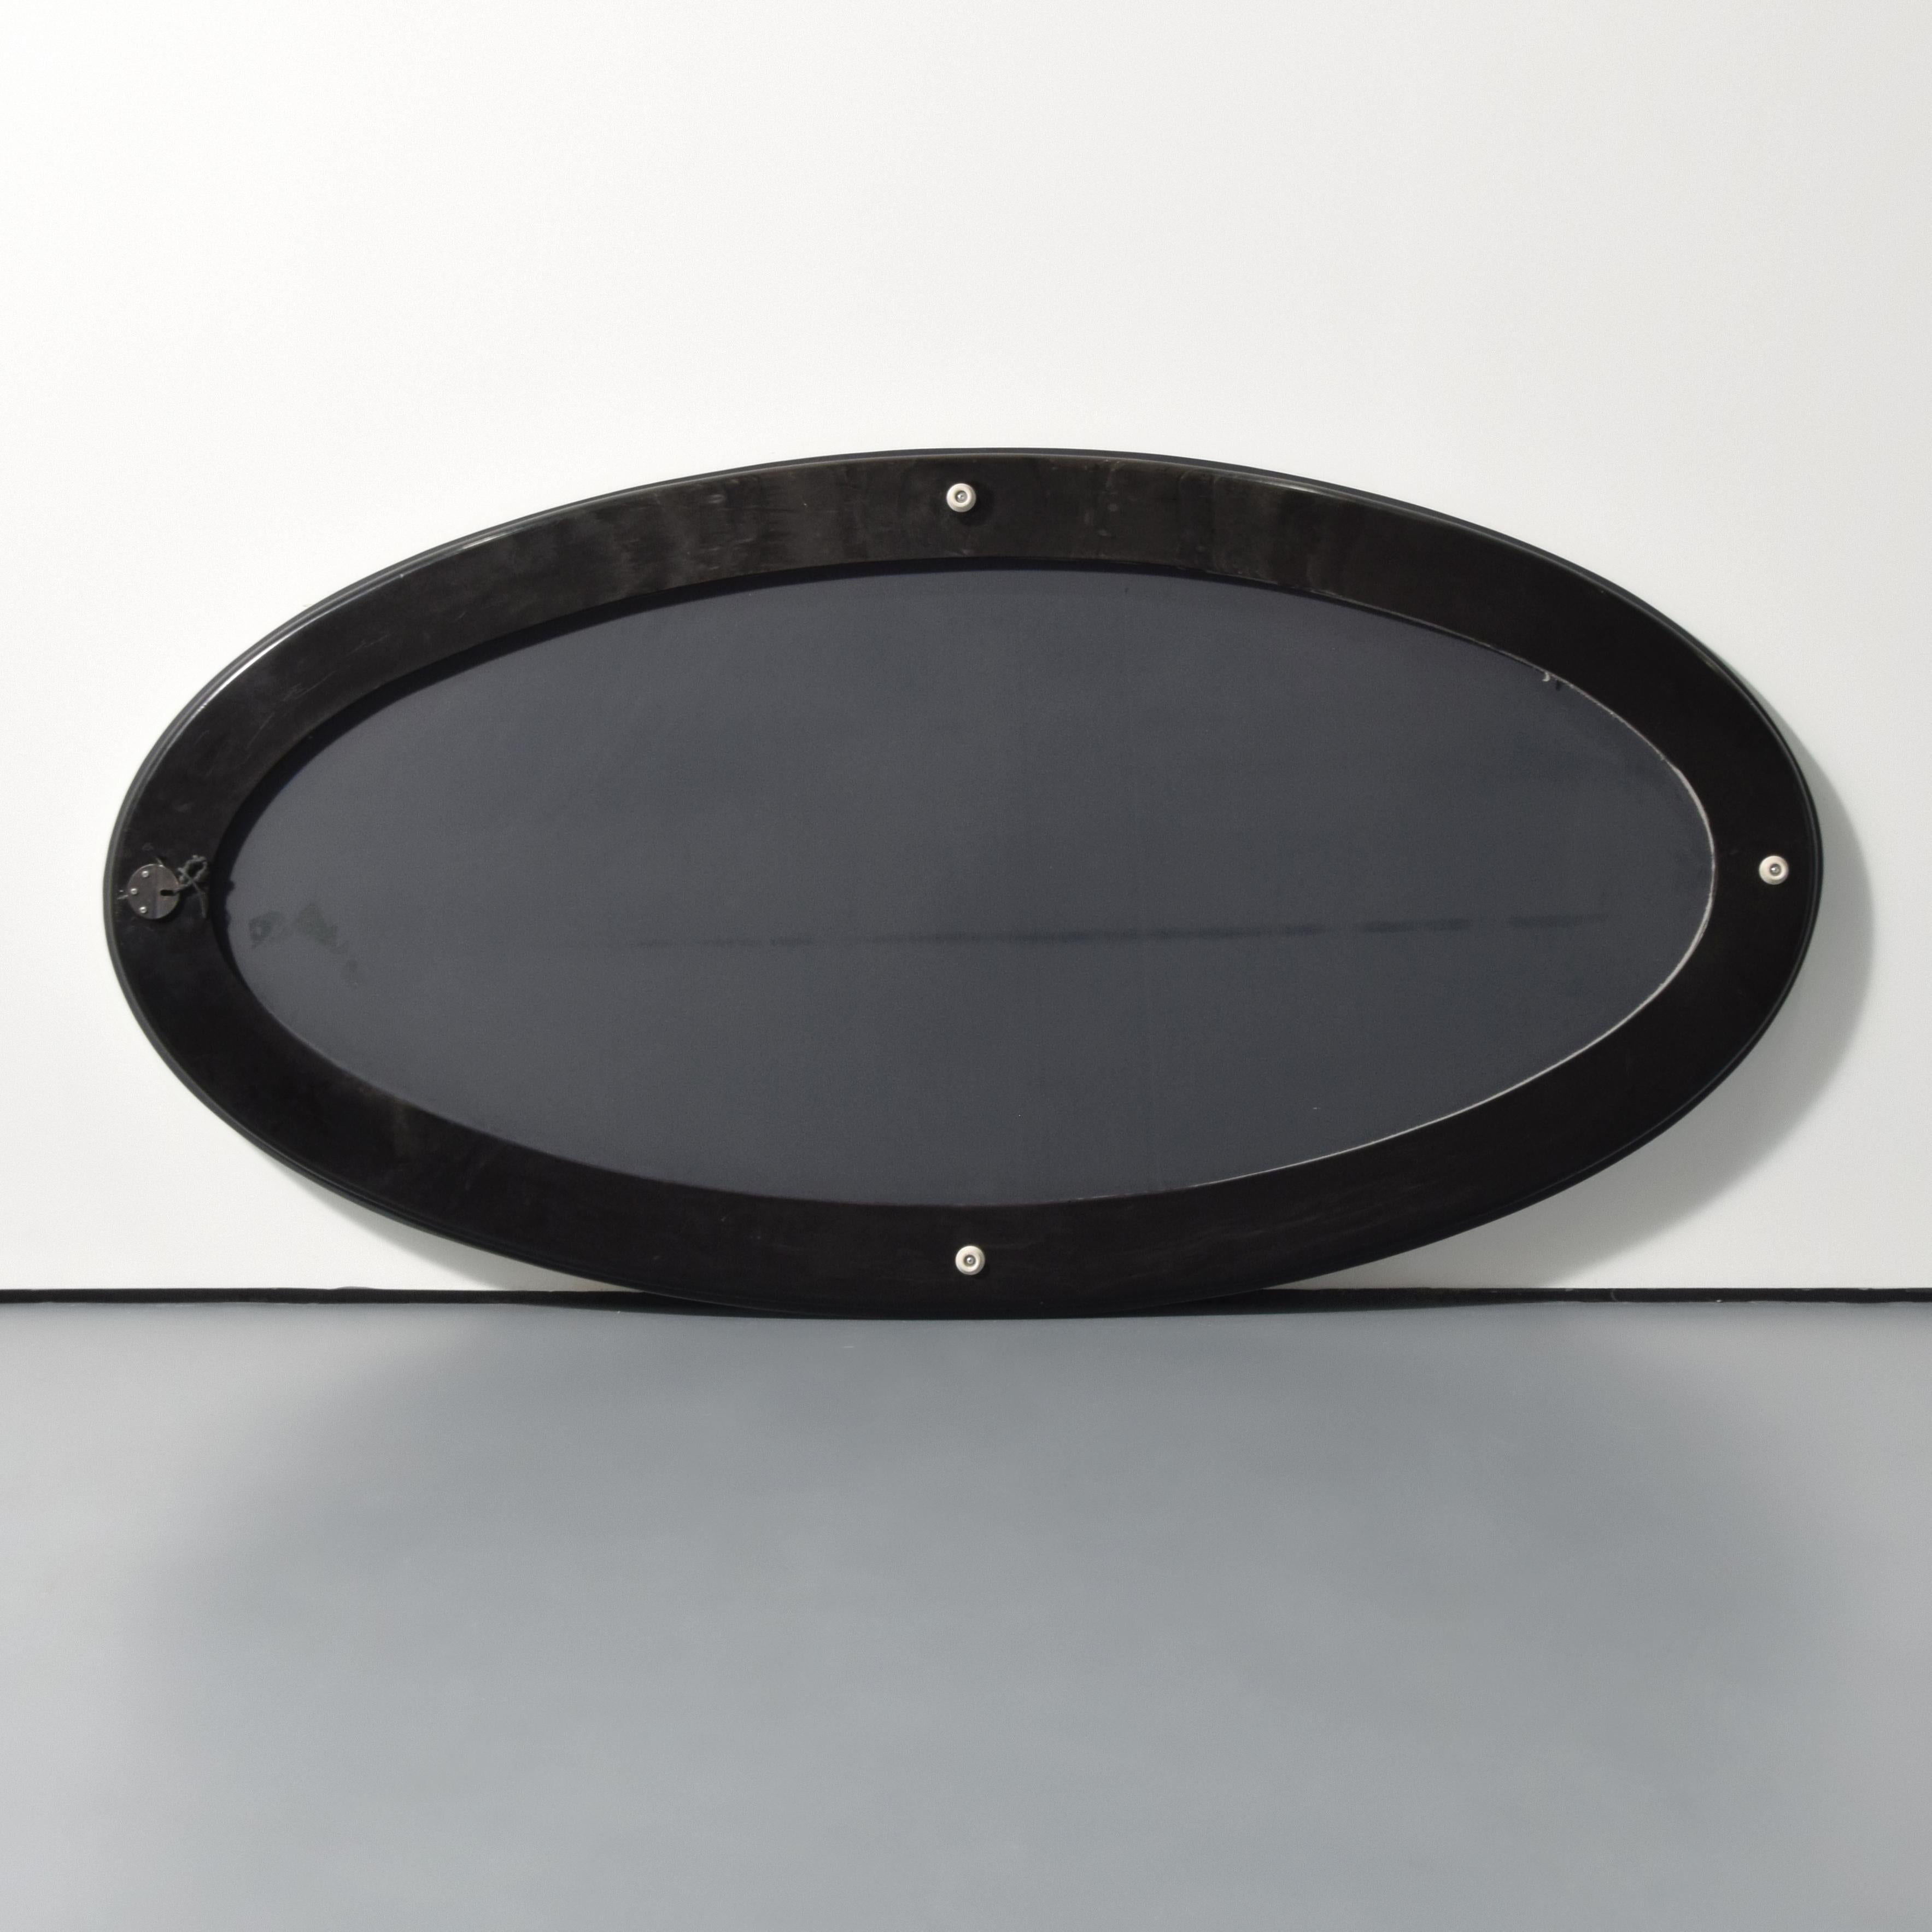 Italian Man Ray “Les Grands Trans-Parents” Mirror For Sale